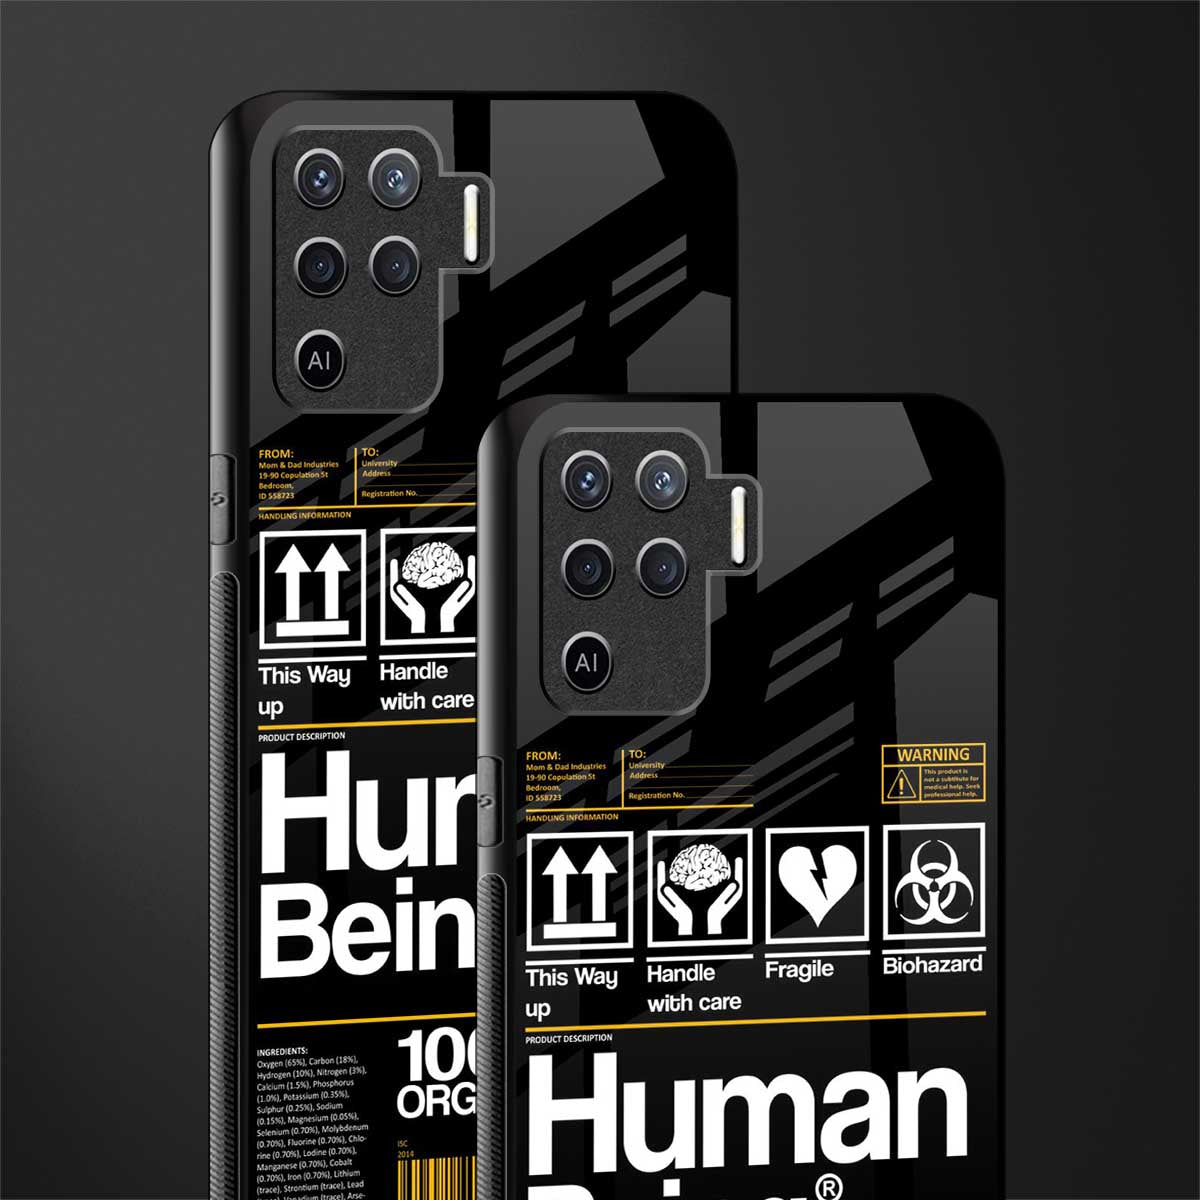 human being label phone cover for oppo f19 pro